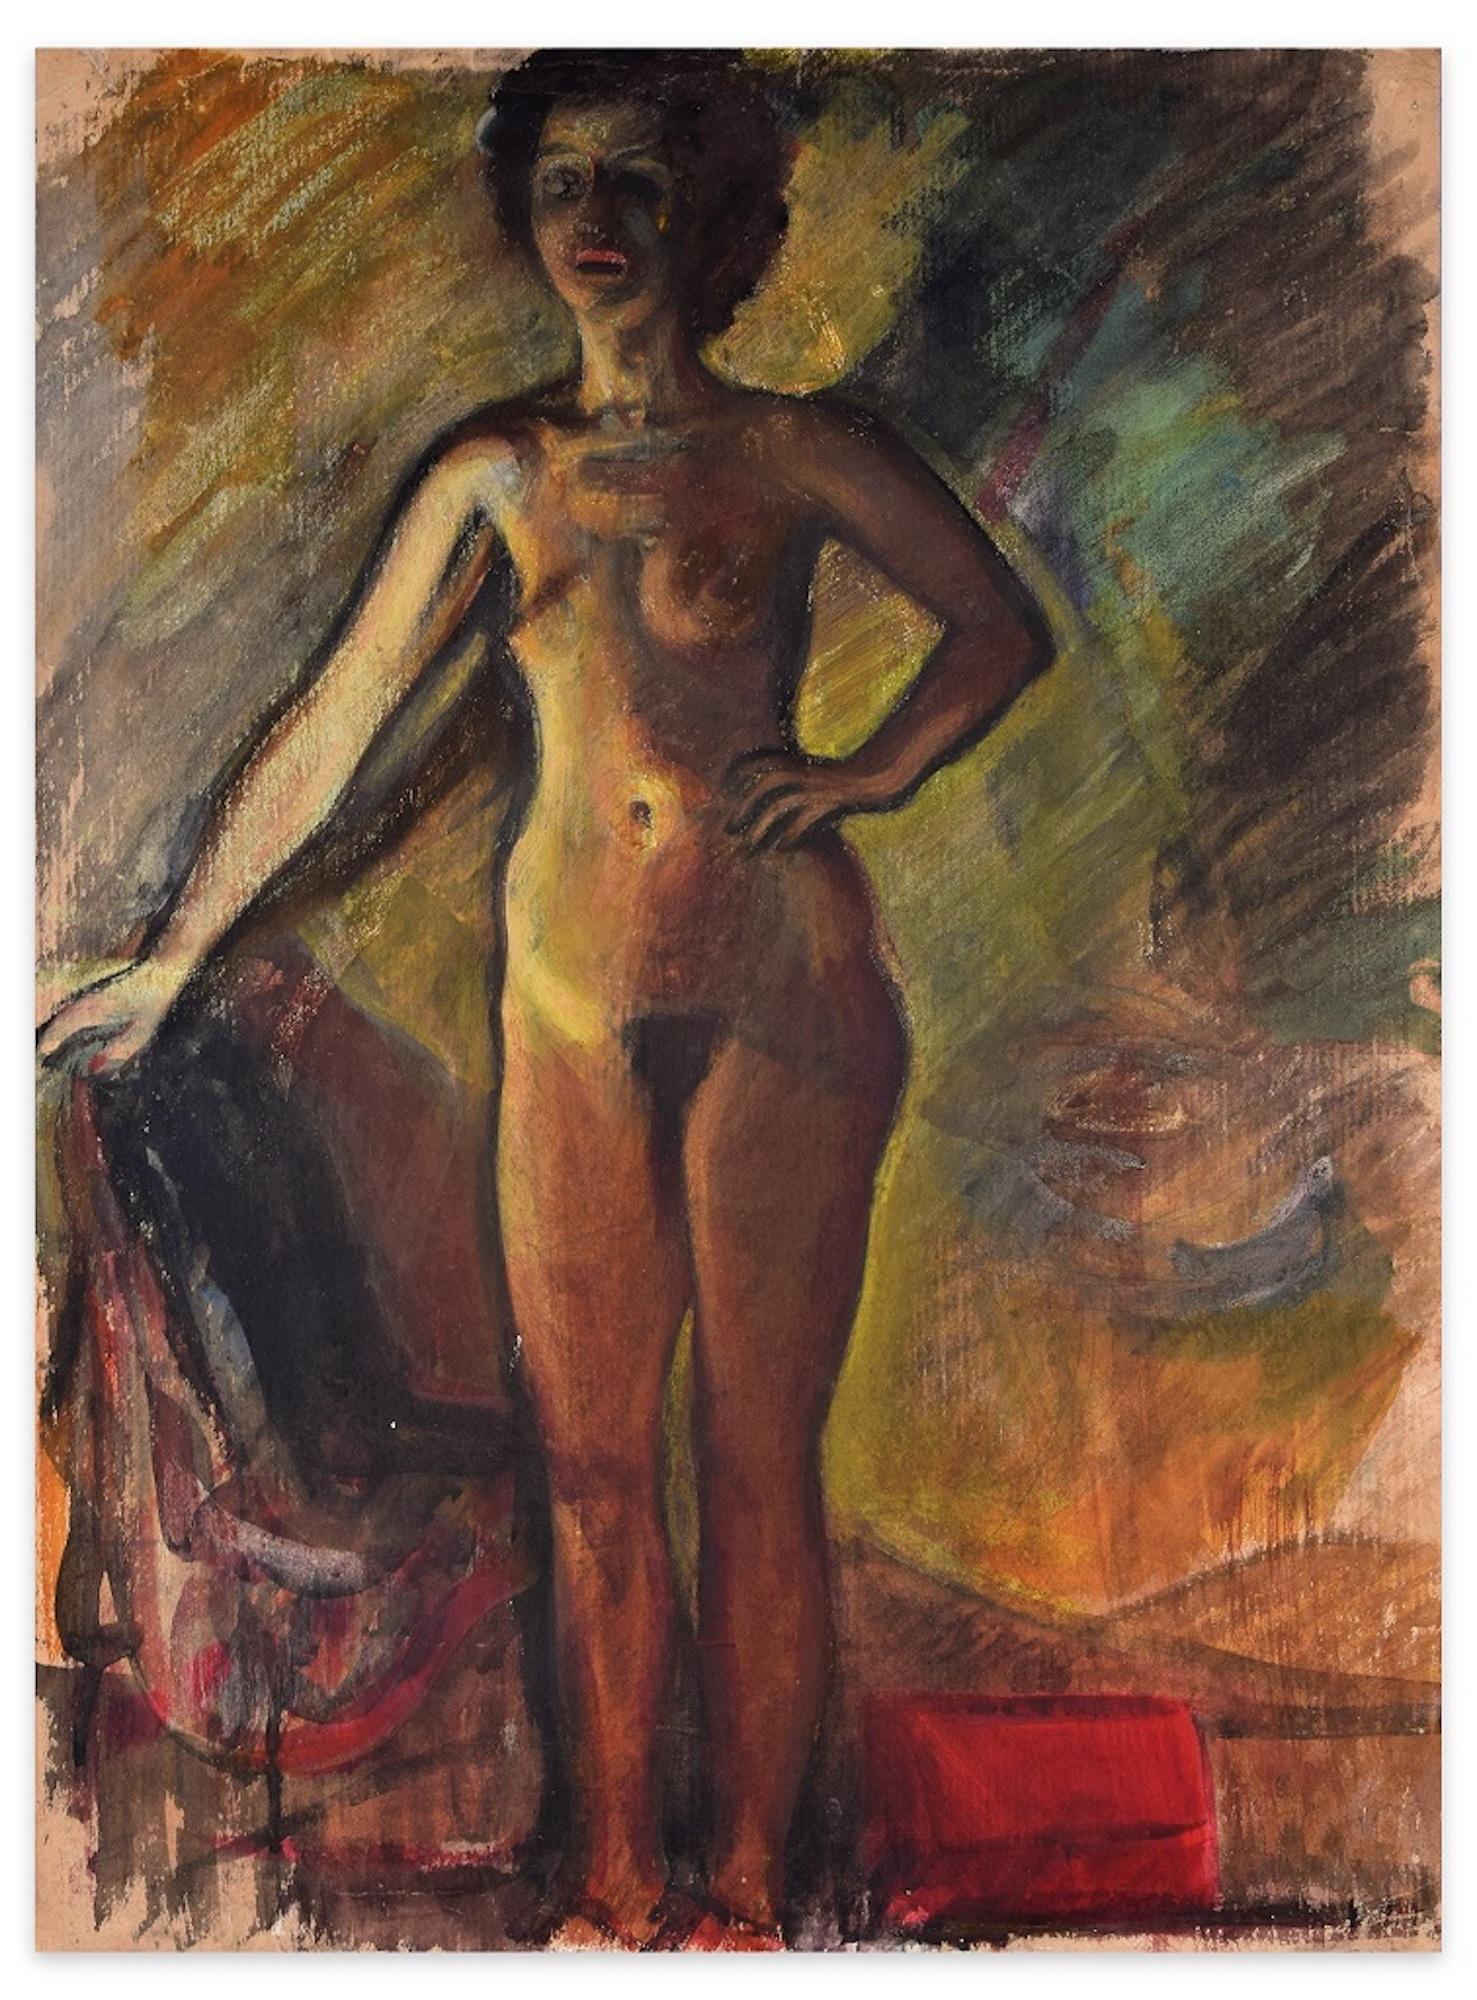 Nudes - Tempera and Carboard on Paper - Early 20th Century